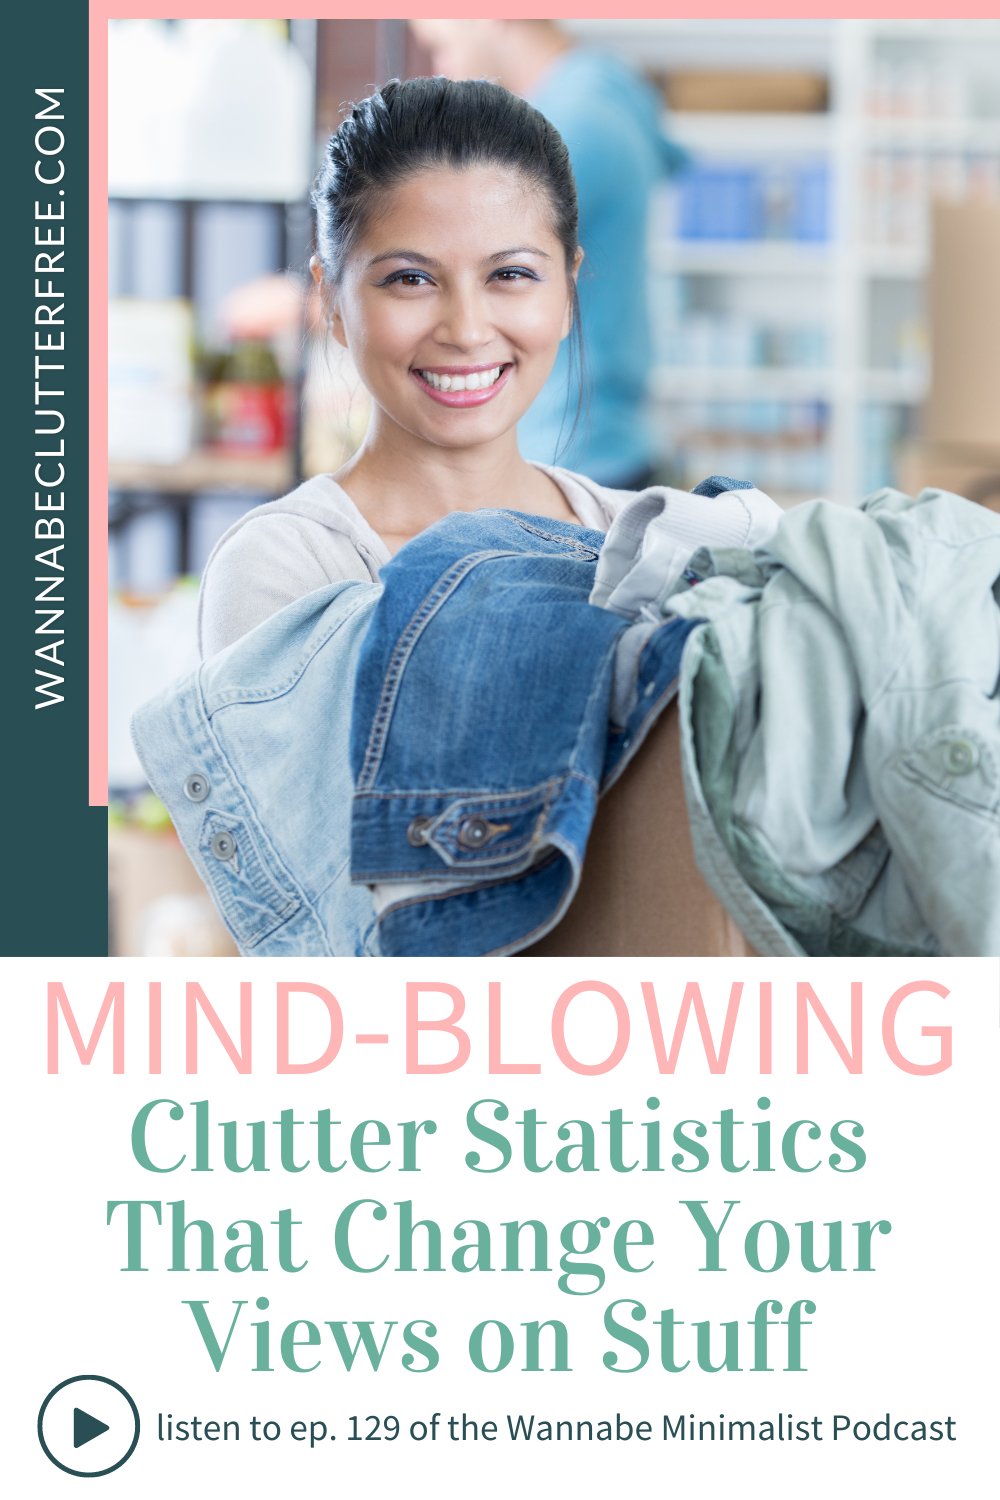 Mind-Blowing Clutter Statistics That Change Your Views on Stuff